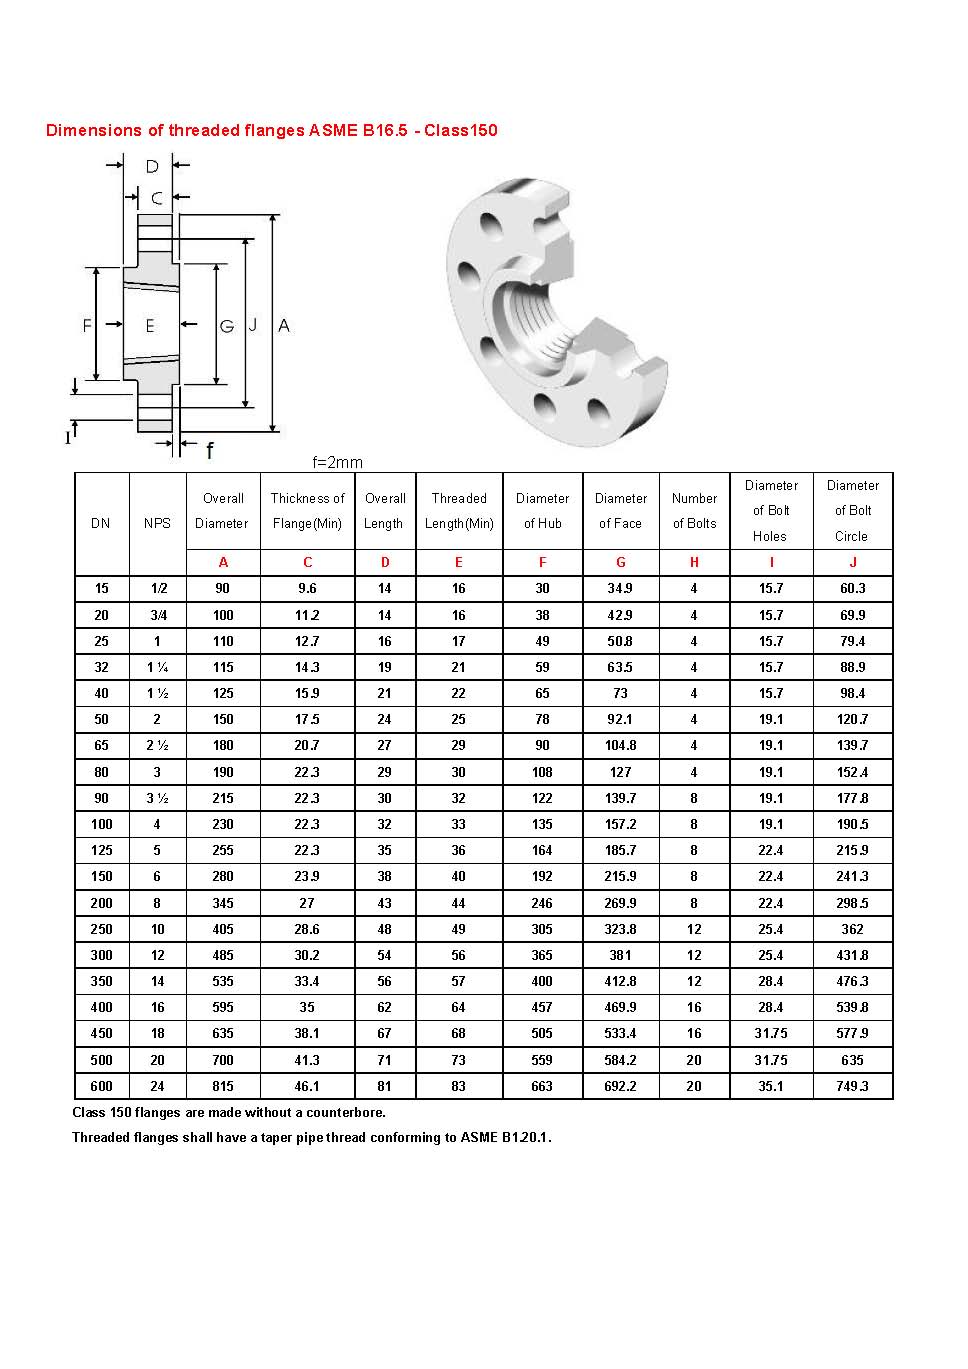 Dimensions of threaded flanges ASME B16.5 class150